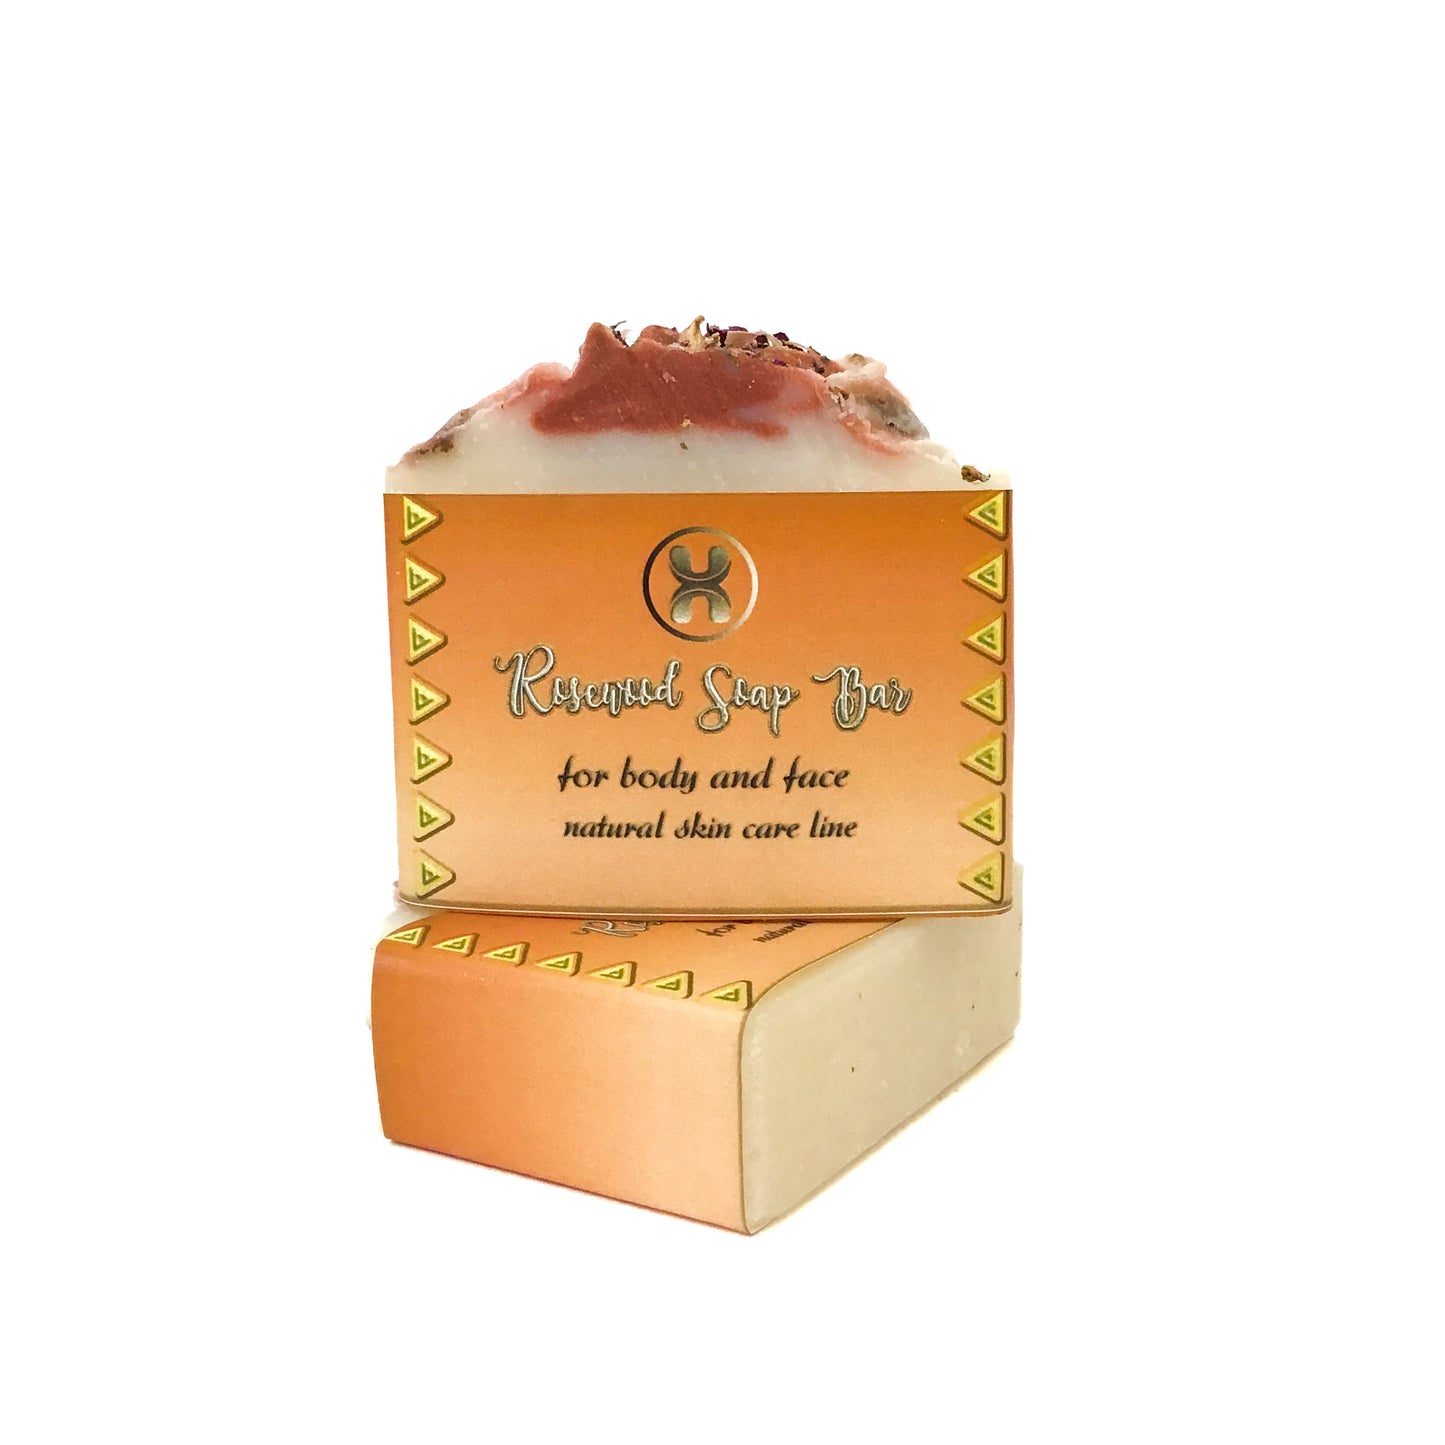 Rosewood Soap Bar | Handmade soap | Daily body and face soap